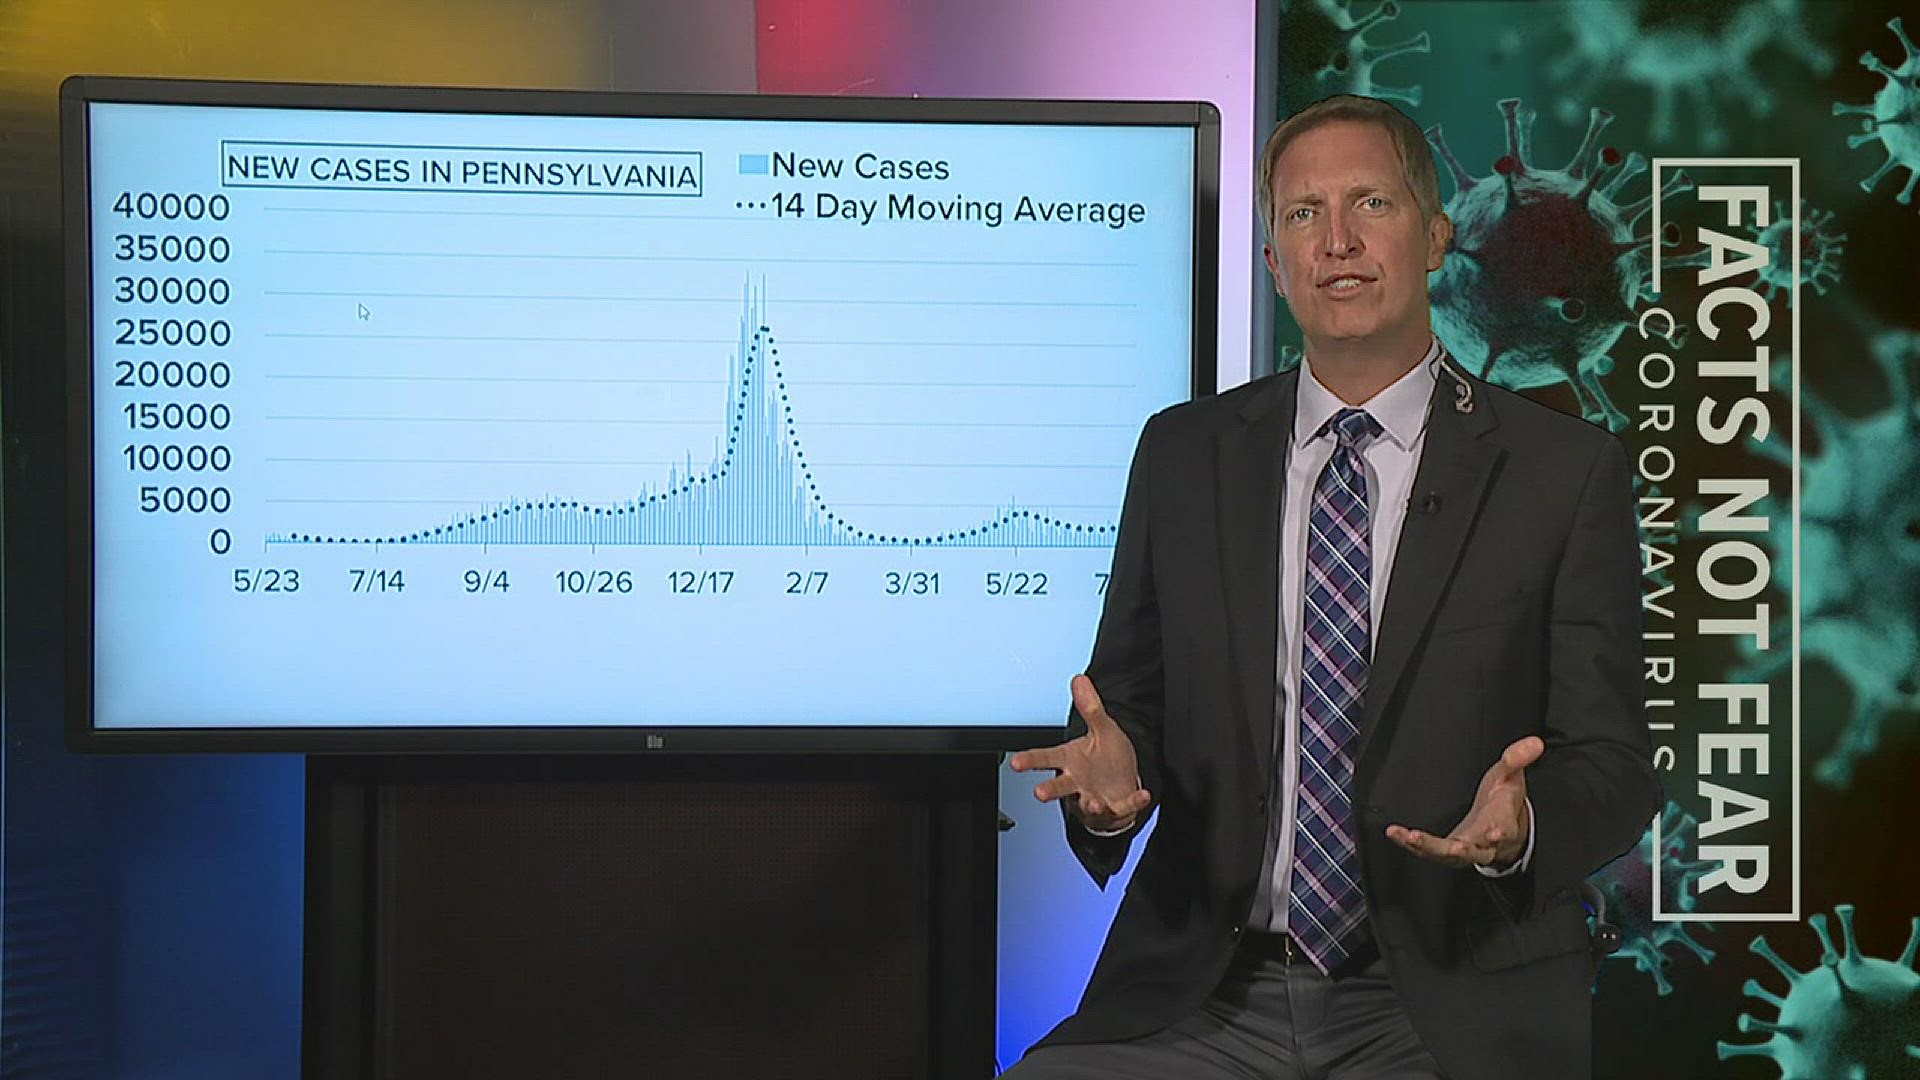 Newswatch 16's Jon Meyer examines the trends in COVID-19 cases and hospitalizations in Pennsylvania over the last week.